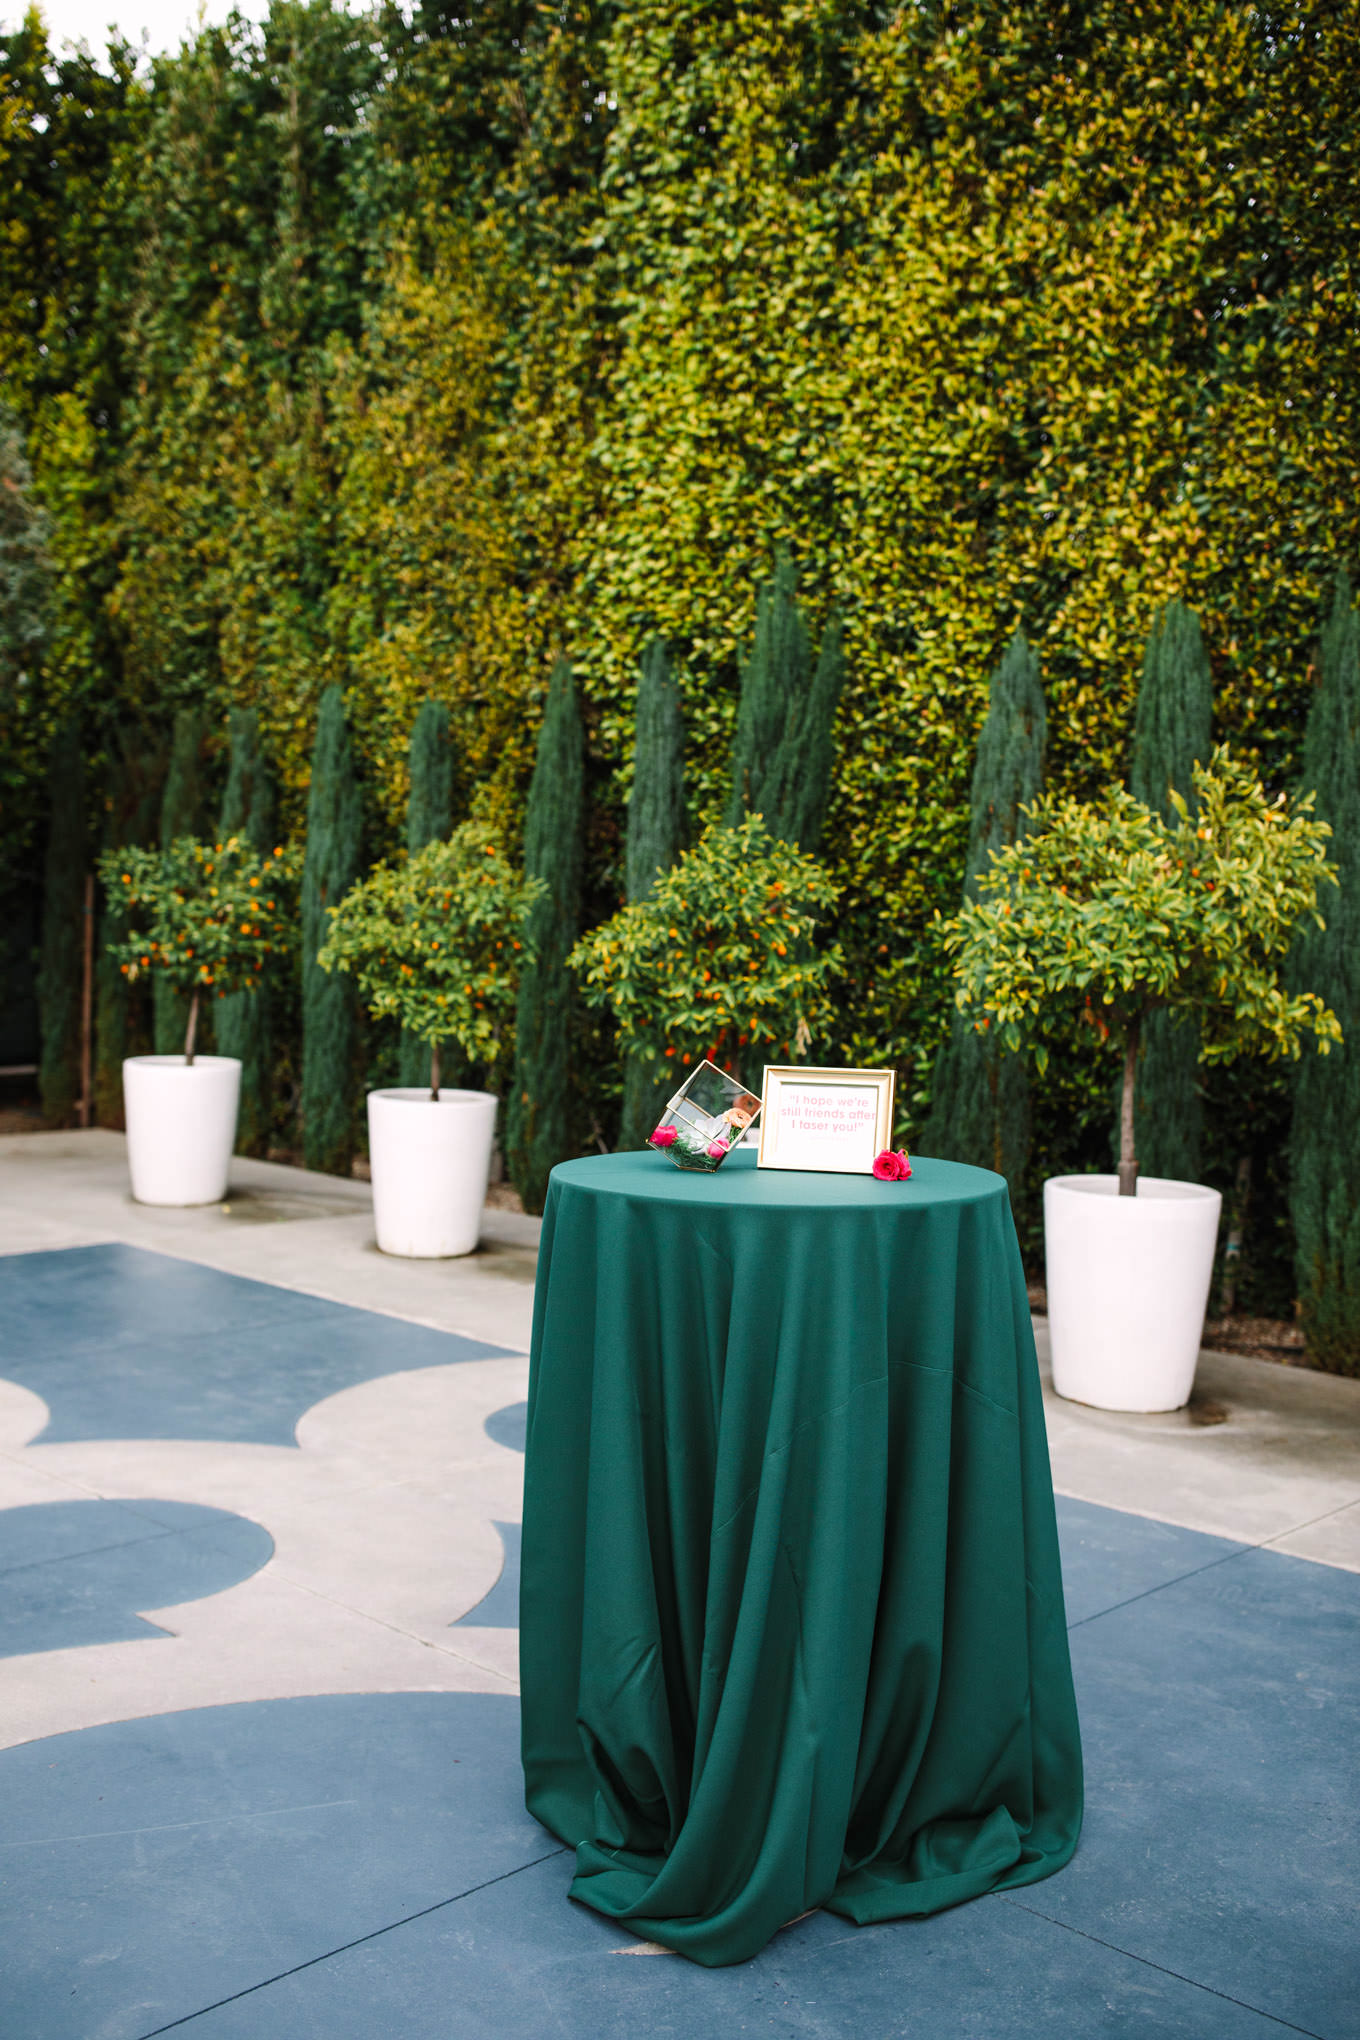 Emerald cocktail bar table | TV inspired wedding at The Fig House Los Angeles | Published on The Knot | Fresh and colorful photography for fun-loving couples in Southern California | #losangeleswedding #TVwedding #colorfulwedding #theknot   Source: Mary Costa Photography | Los Angeles wedding photographer